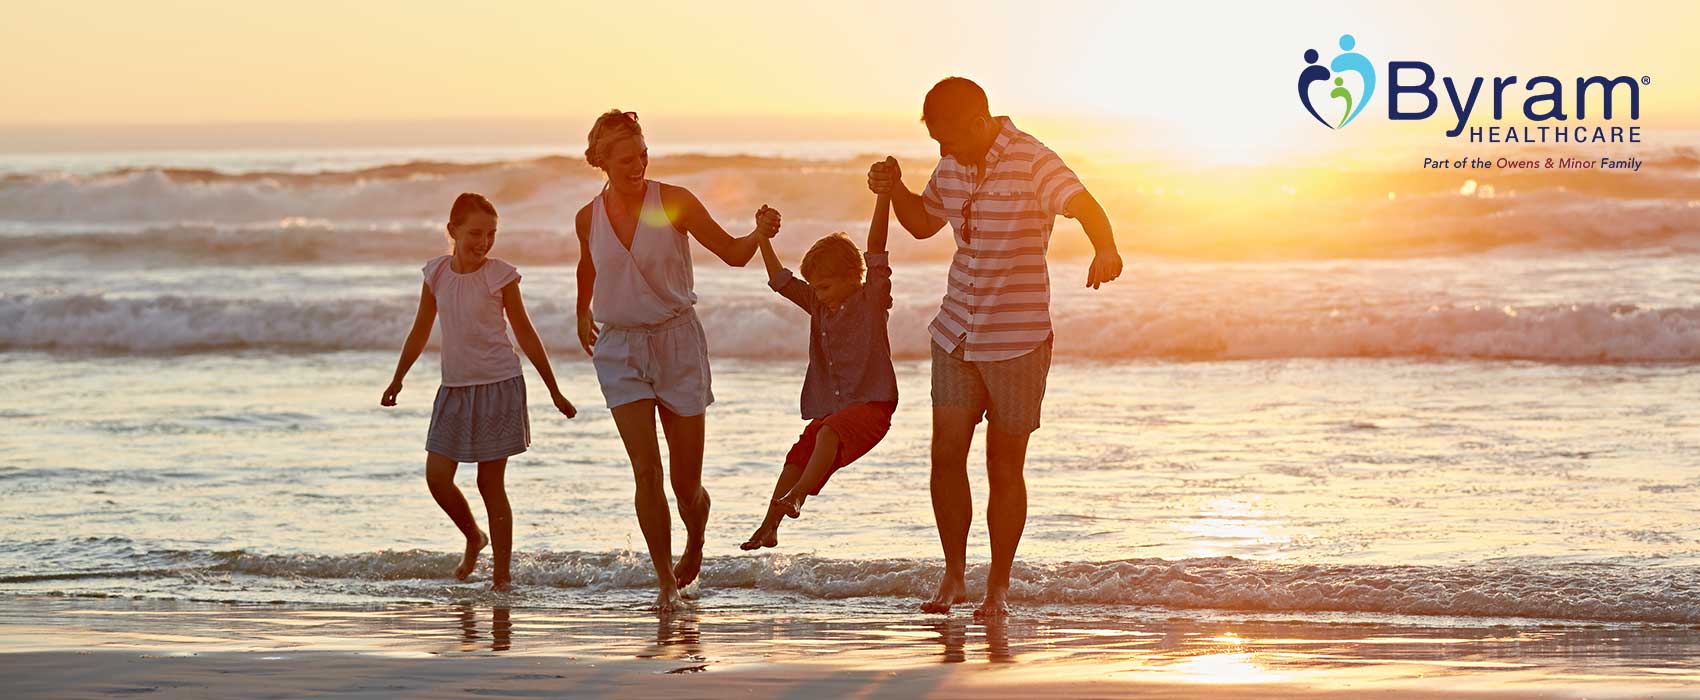 Family walking on the beach during sunset.